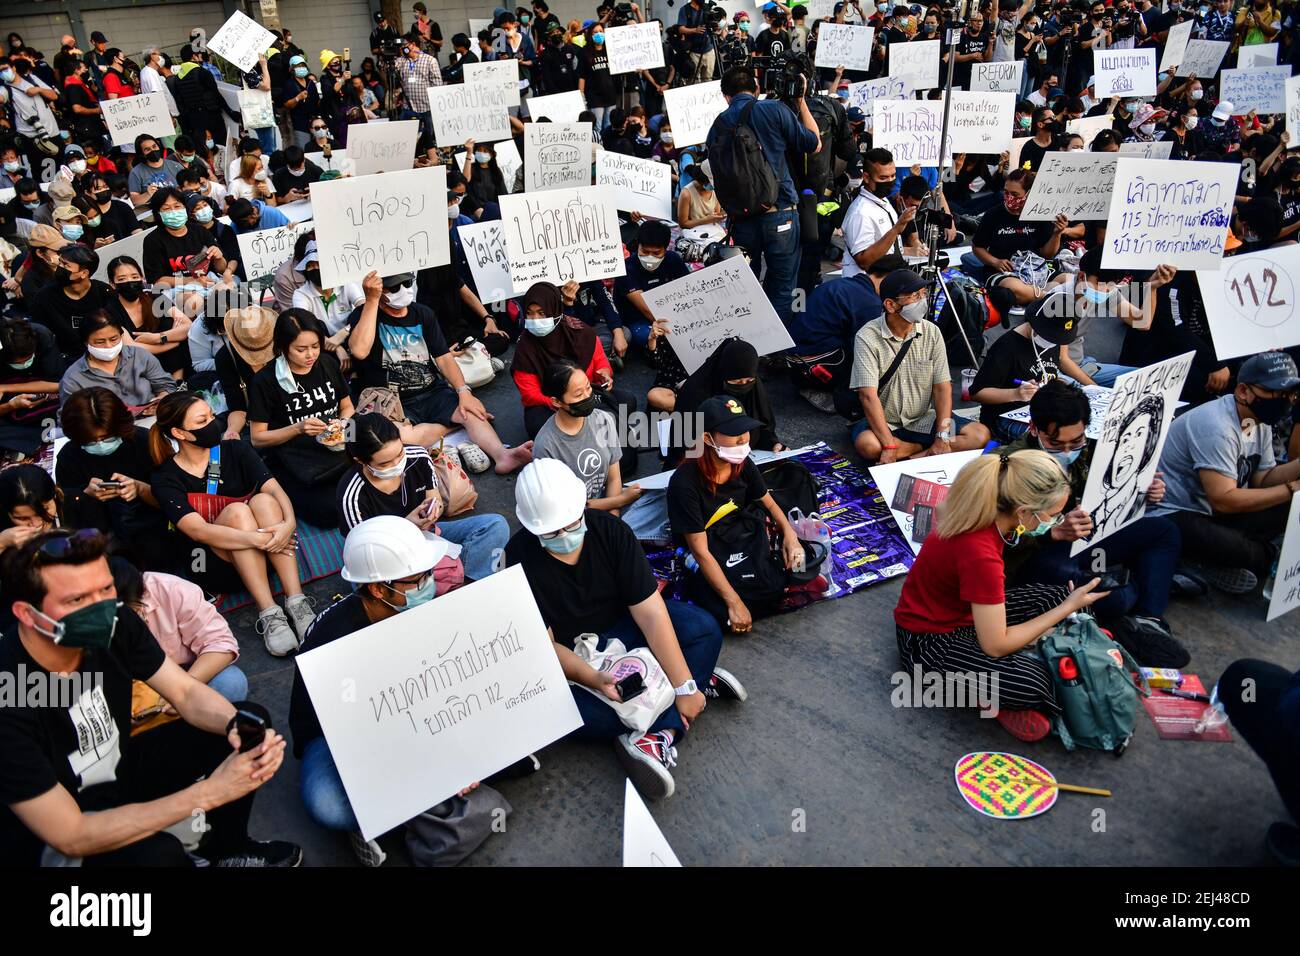 Thailand. 20th Feb, 2021. Pro-democracy protesters hold up the placards during protest in front of the Parliament in Bangkok Thailand, February 20, 2021. Anti-government protesters - including leaders who were charged with Lese Majeste offenses - amassed in Bangkok again in large numbers, as the Thai parliament voted on no-confidence motion in the government on Saturday. (Photo by Vichan Poti/Pacific Press/Sipa USA) Credit: Sipa USA/Alamy Live News Stock Photo